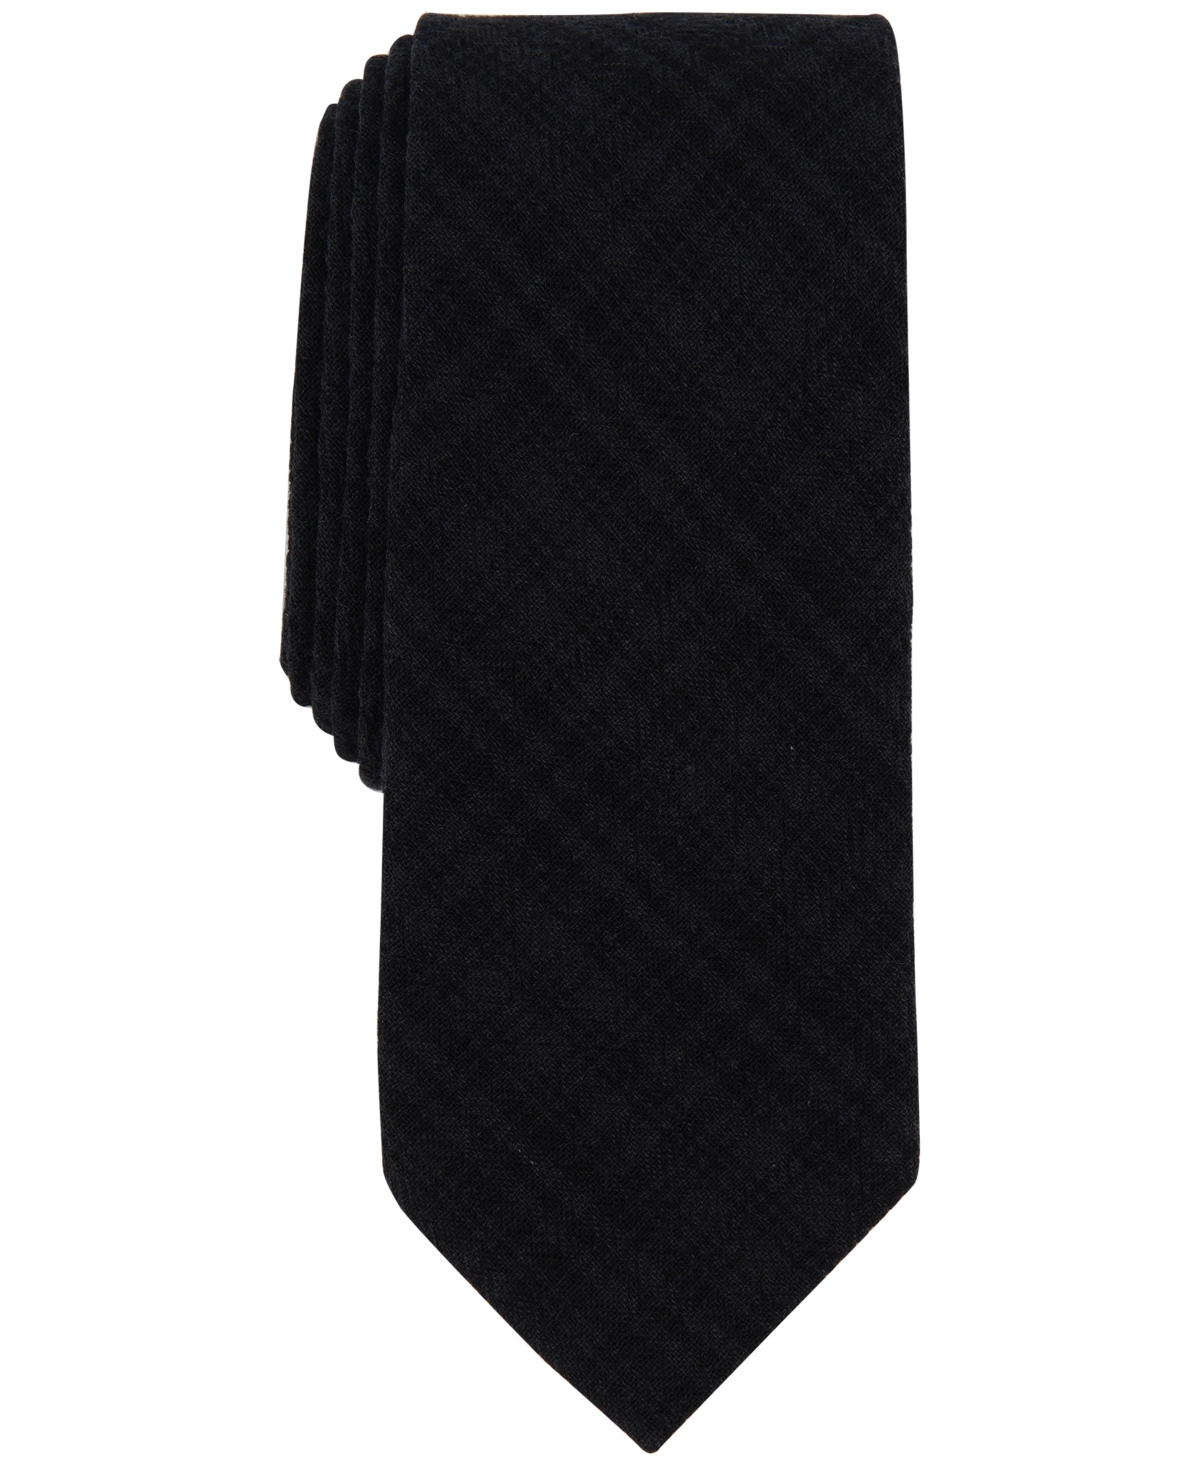 Men's Toto Plaid Tie, Created for Macy's - Navy